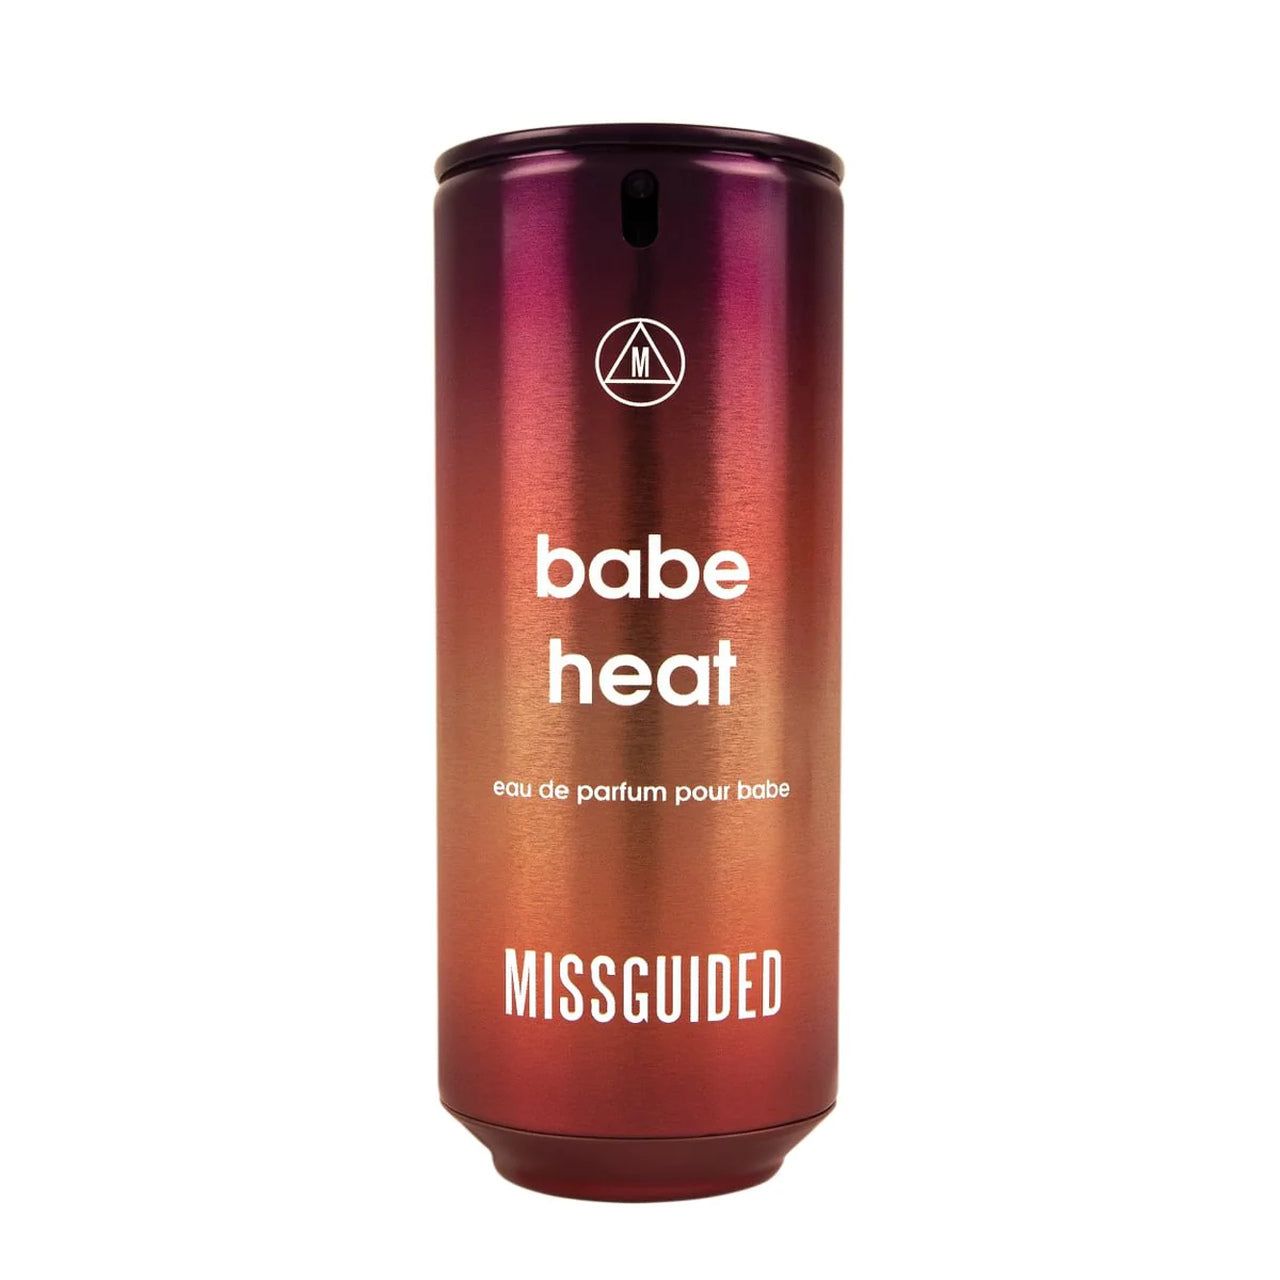 MISSGUIDED Babe Heat